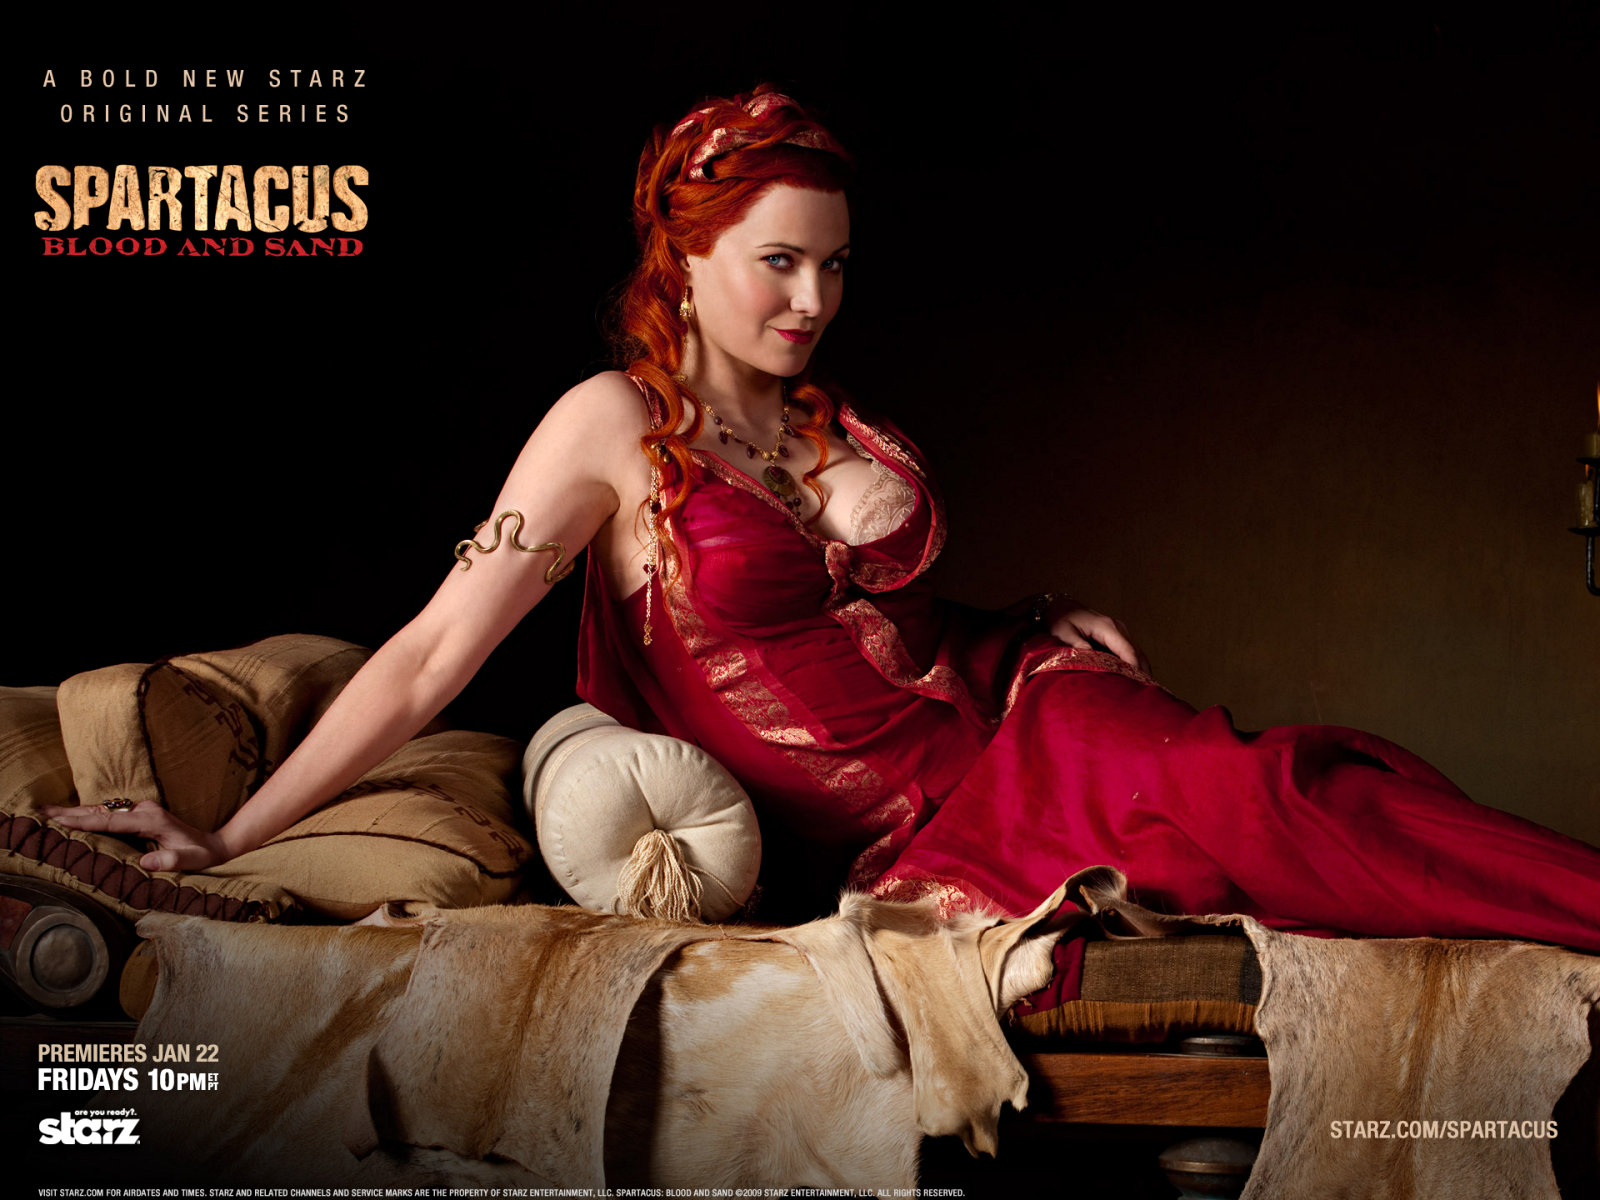 spartacus blood and sand movie